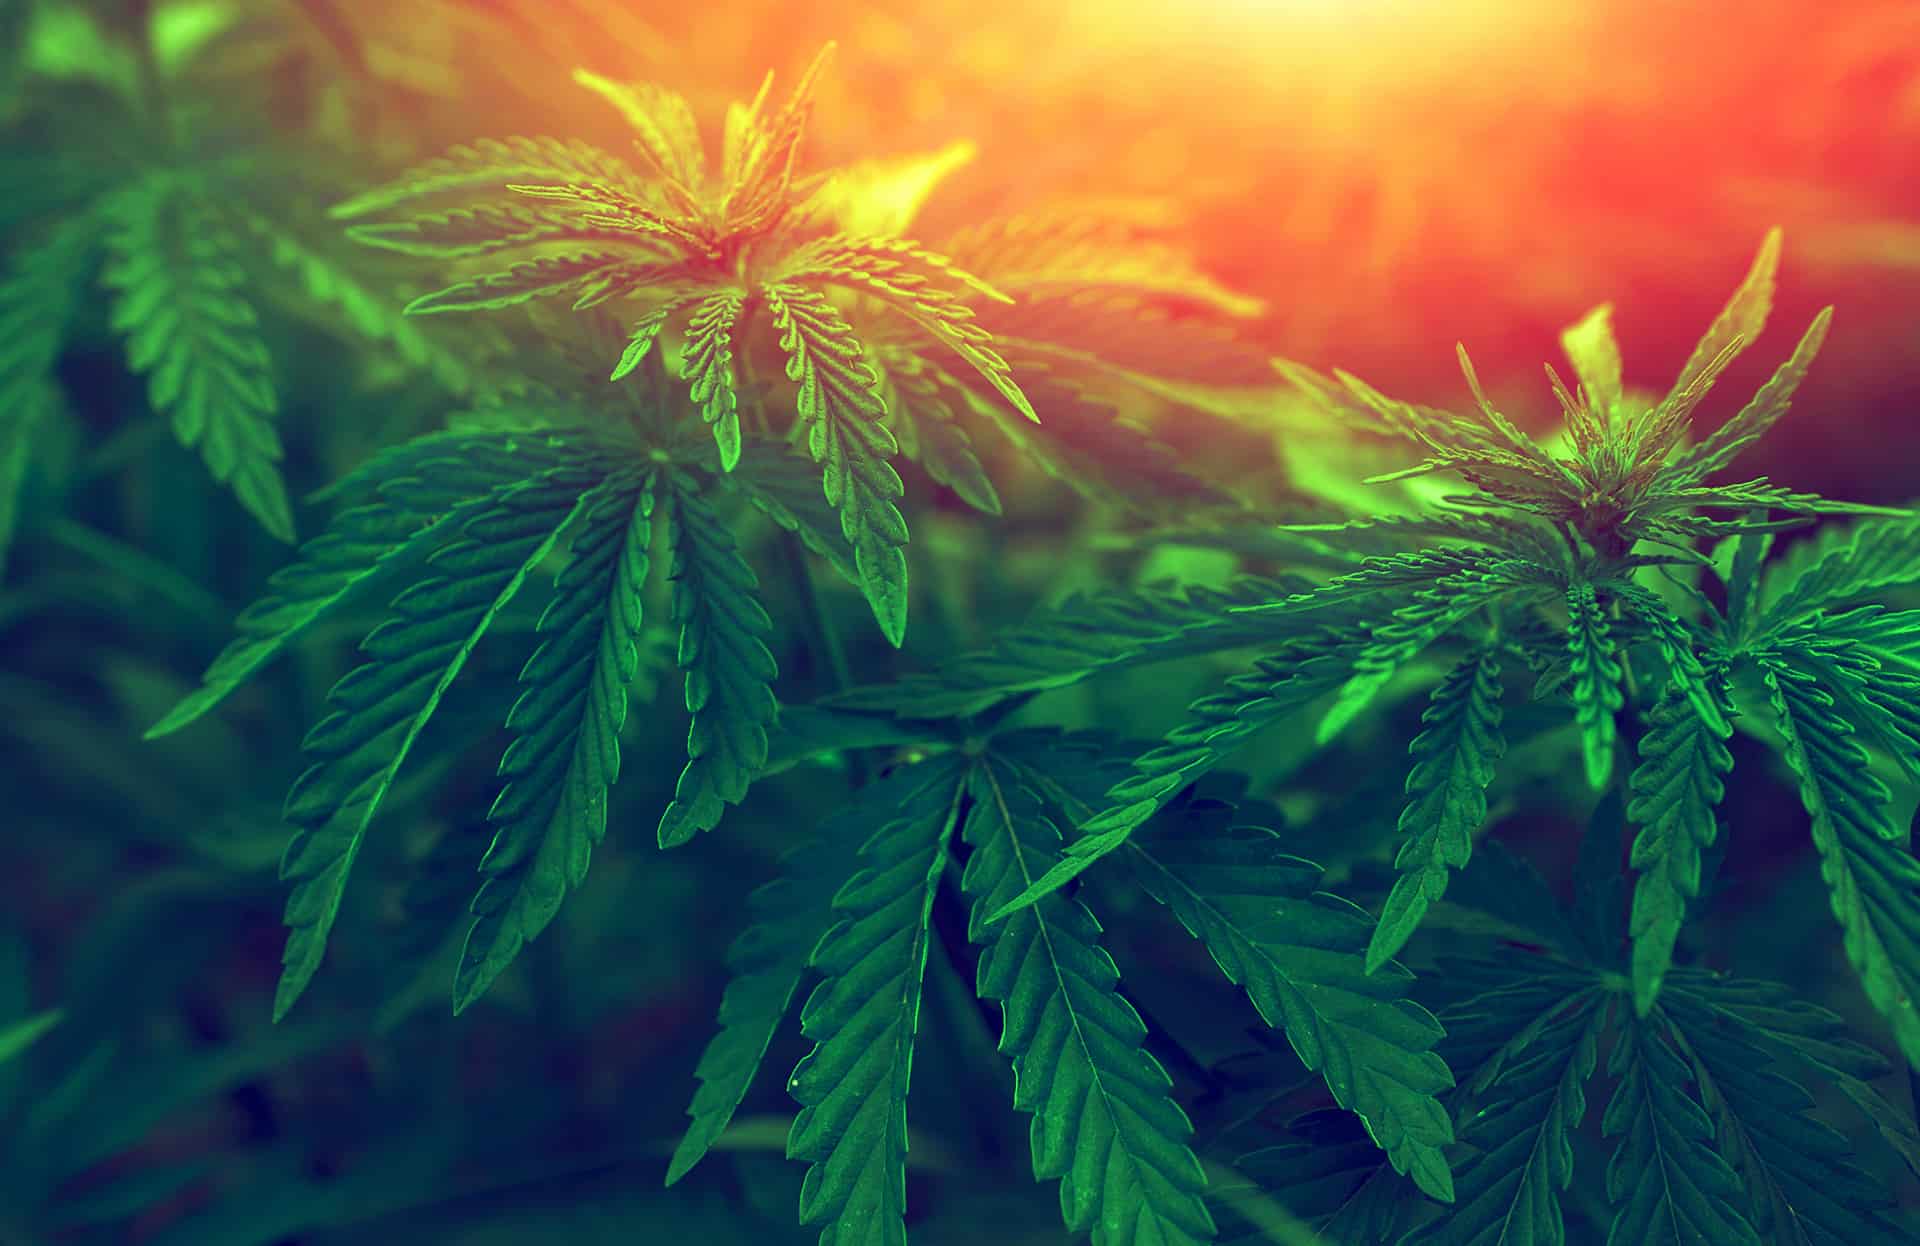 What You Should Know About Marijuana Legalization